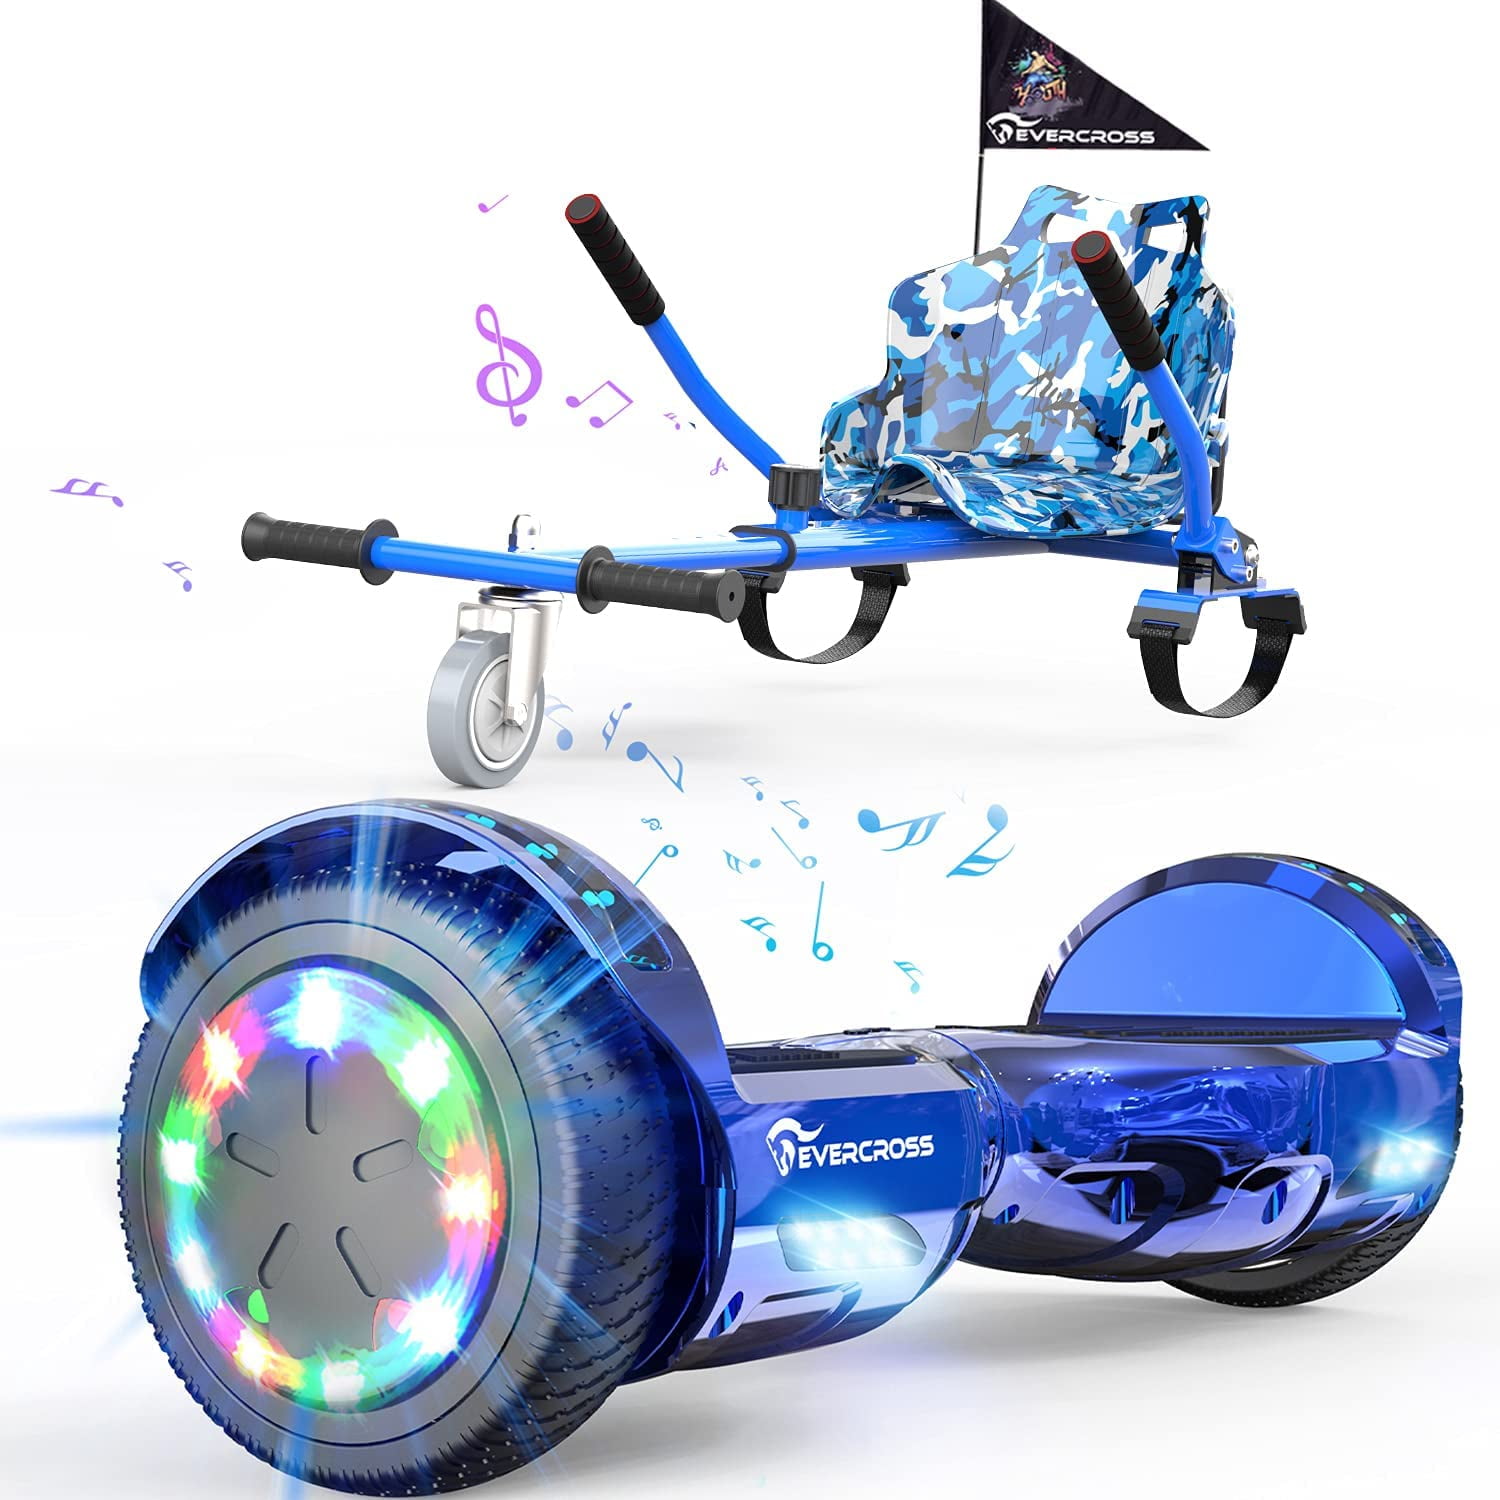 Dual Motors Hoverboards with Bluetooth Speaker & Colorful LED Light EverCross Hoverboard 6.5 Two-Wheel Self Balancing Scooter Electric Hoverboard Scooter Suitable for Kids and Adults 